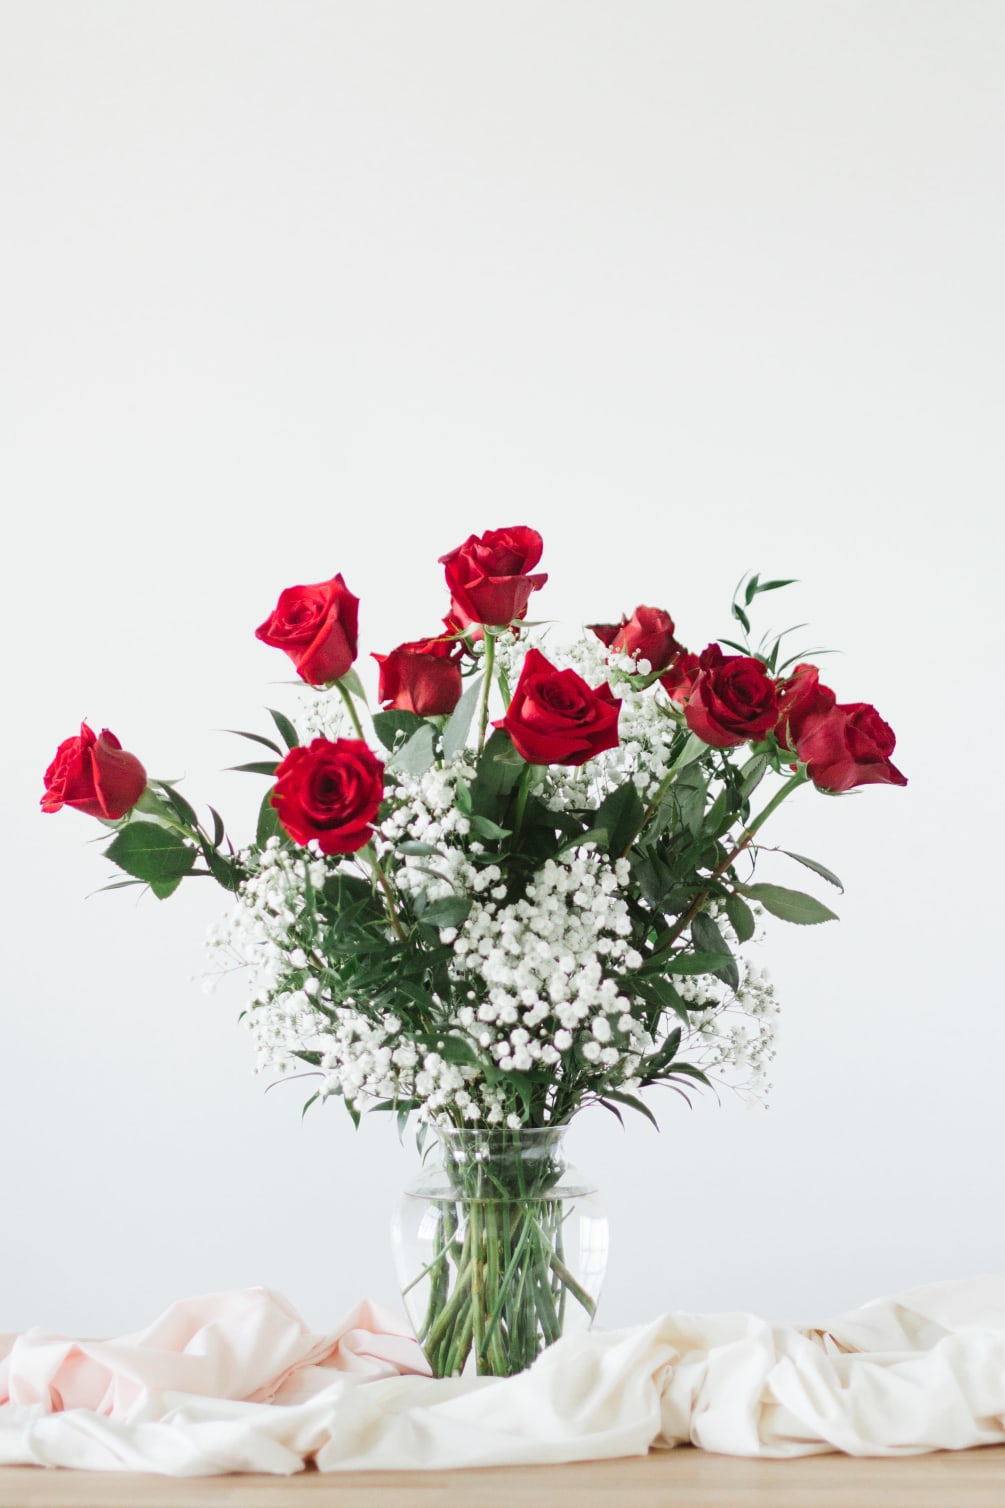 Classic dozen rose arrangement with 12 long-stemmed bold &#039;freedom&#039; red roses, baby&#039;s